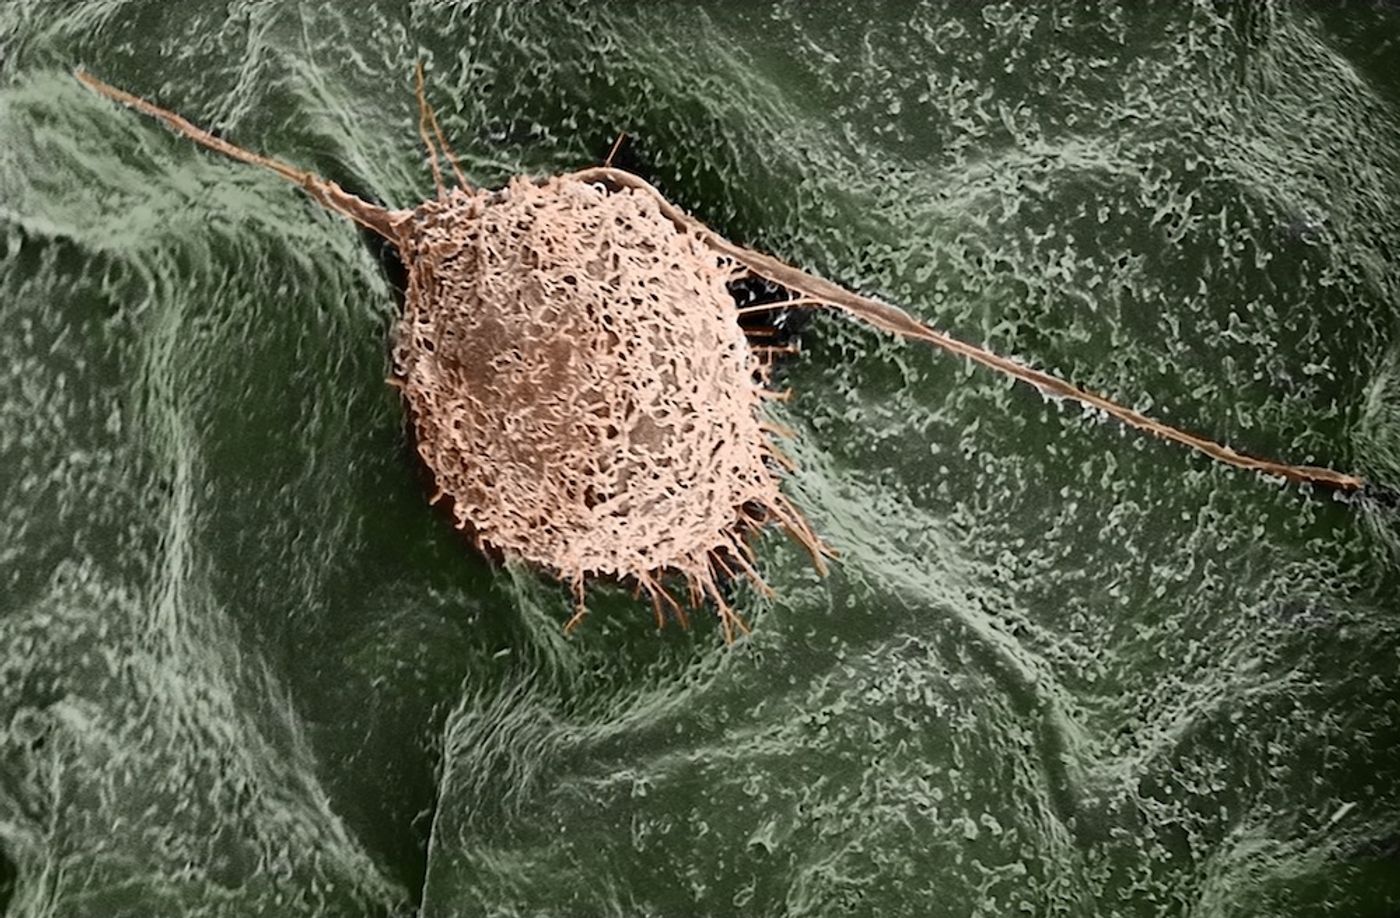 A human fibroblast cell finds a home on a lilac leaf. / Credit: Gianluca Fontana